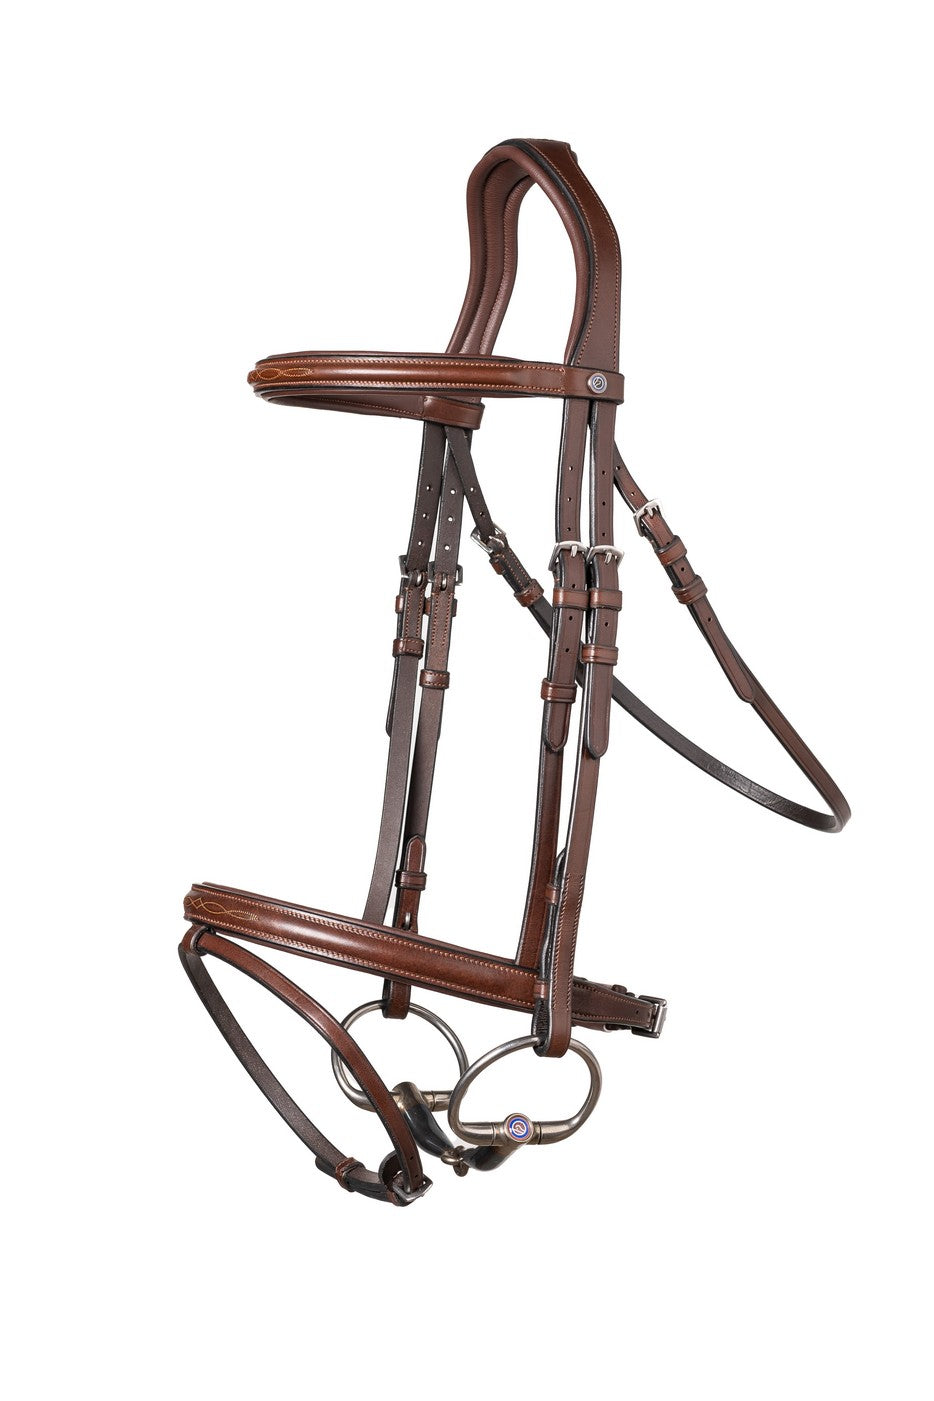 TRUST bridle Calgary combined noseband silver buckle Brown